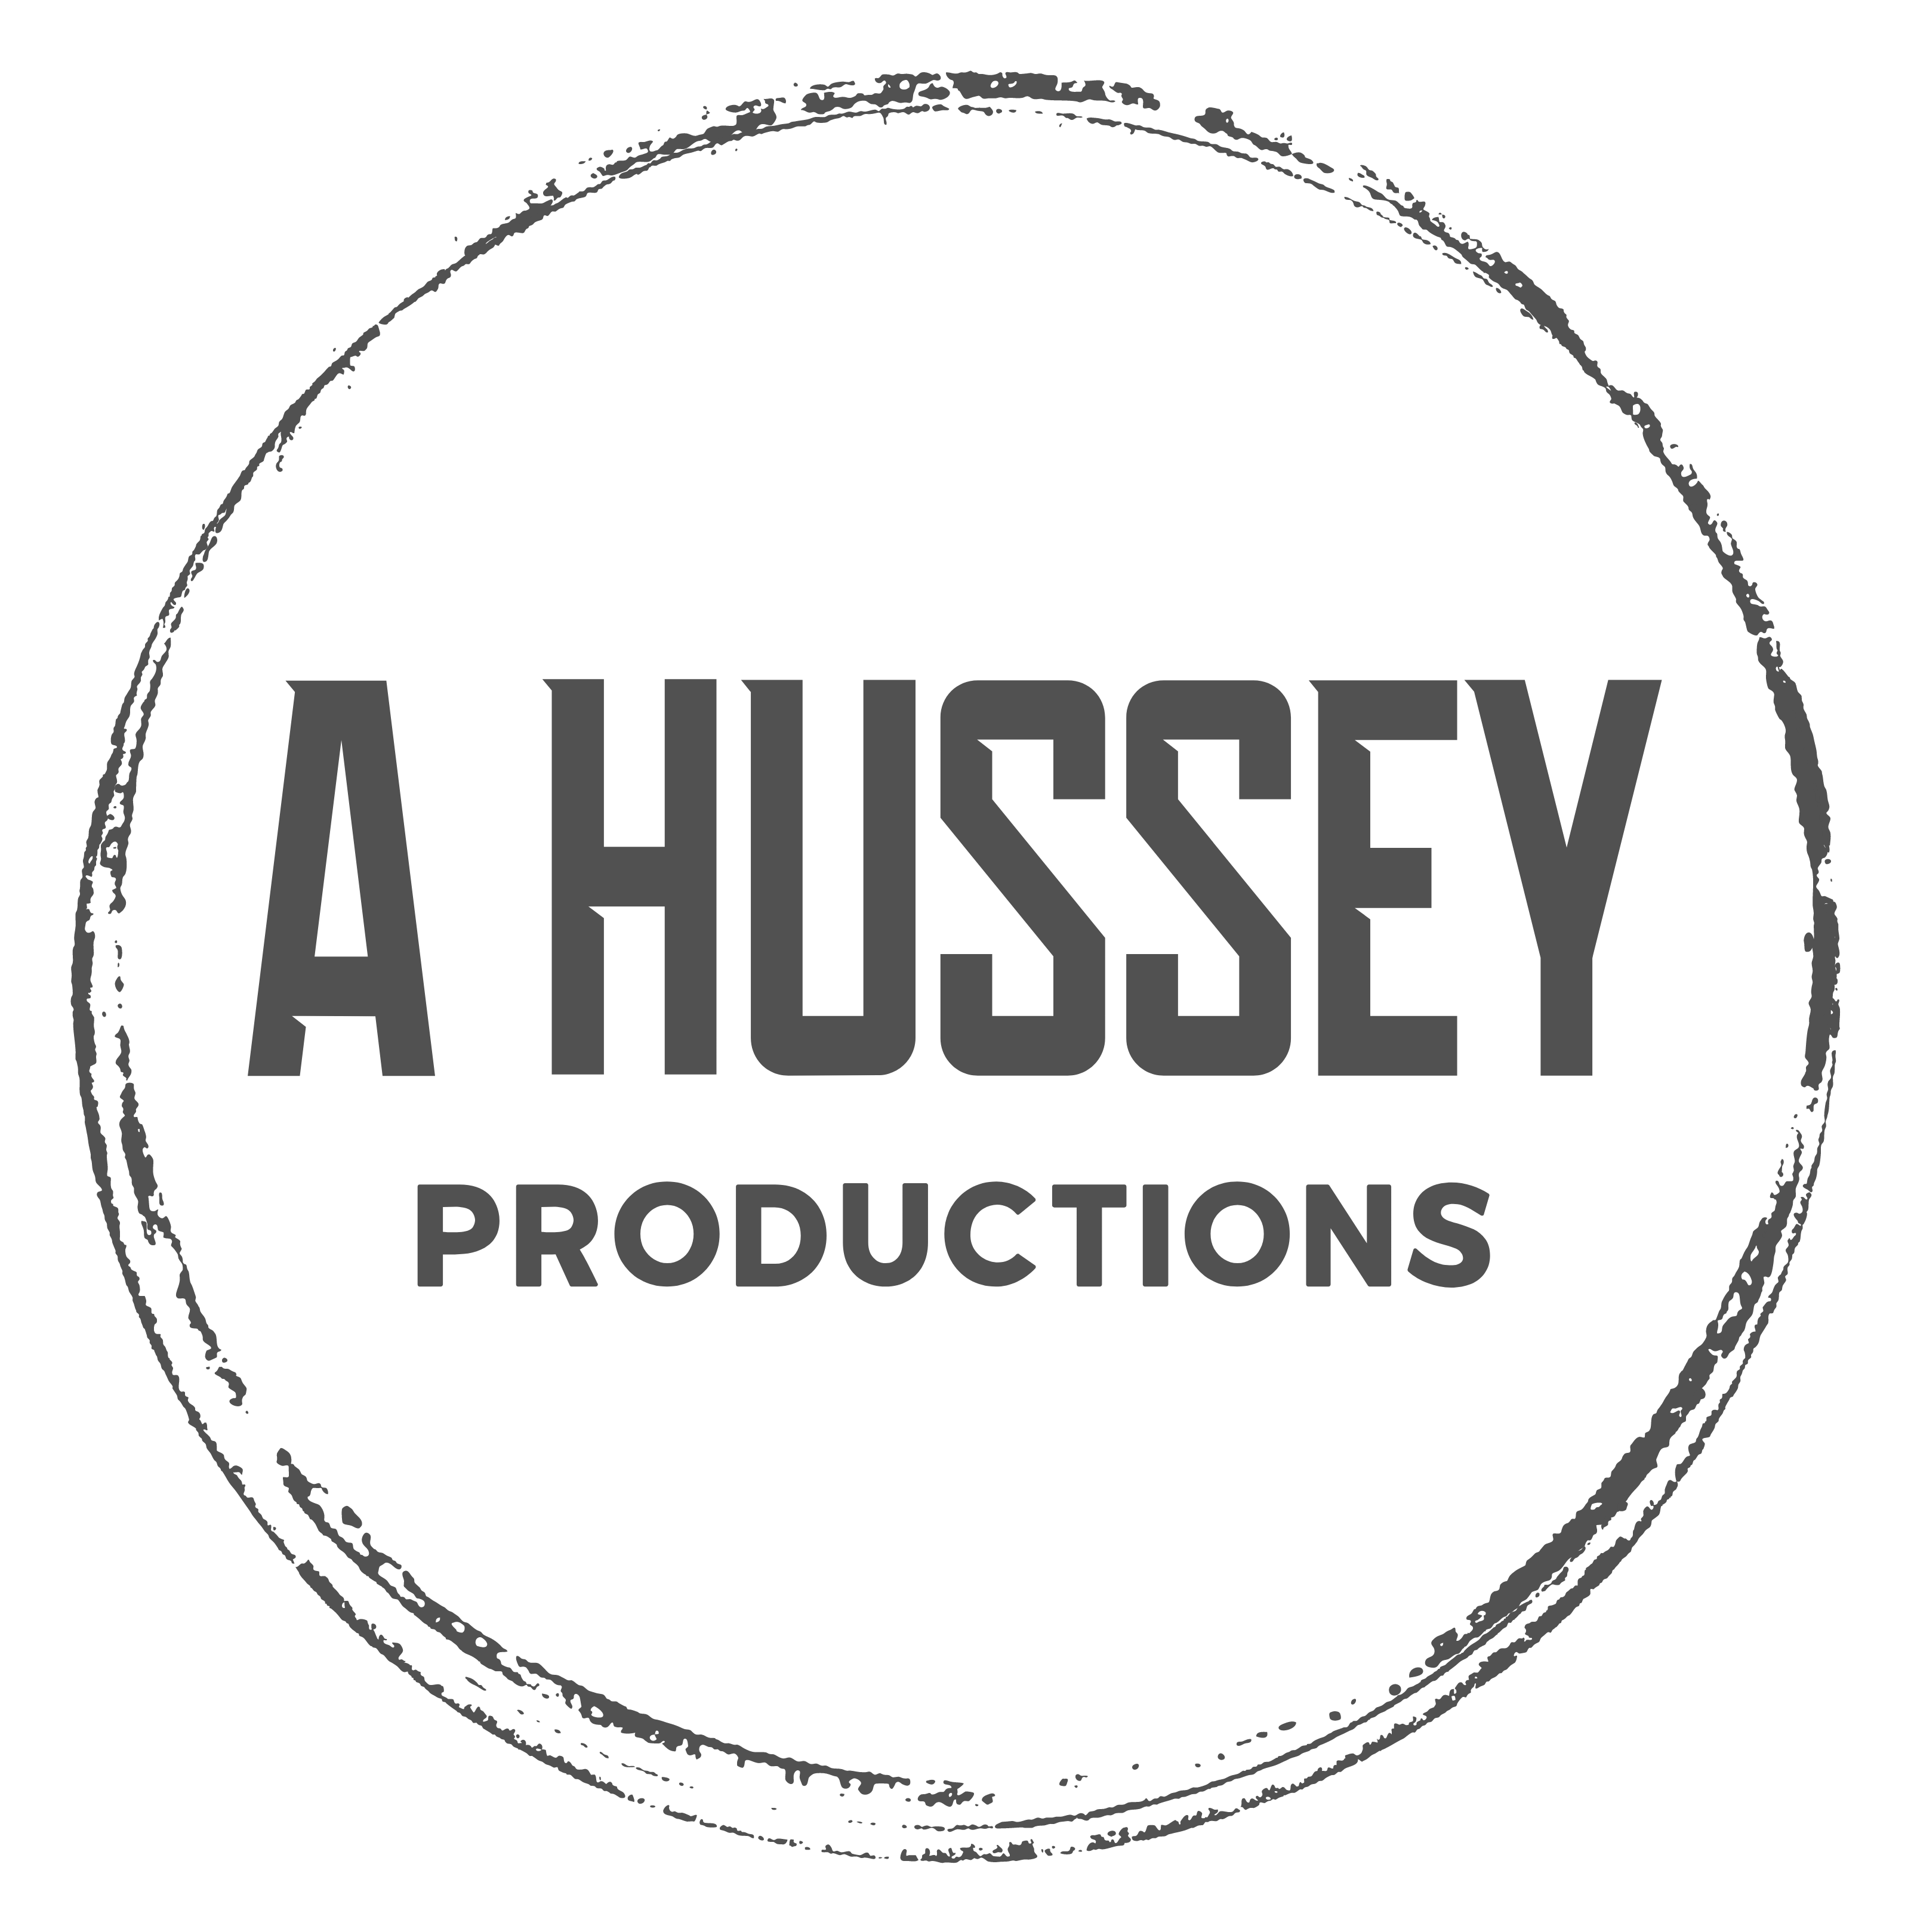 A Hussey Productions